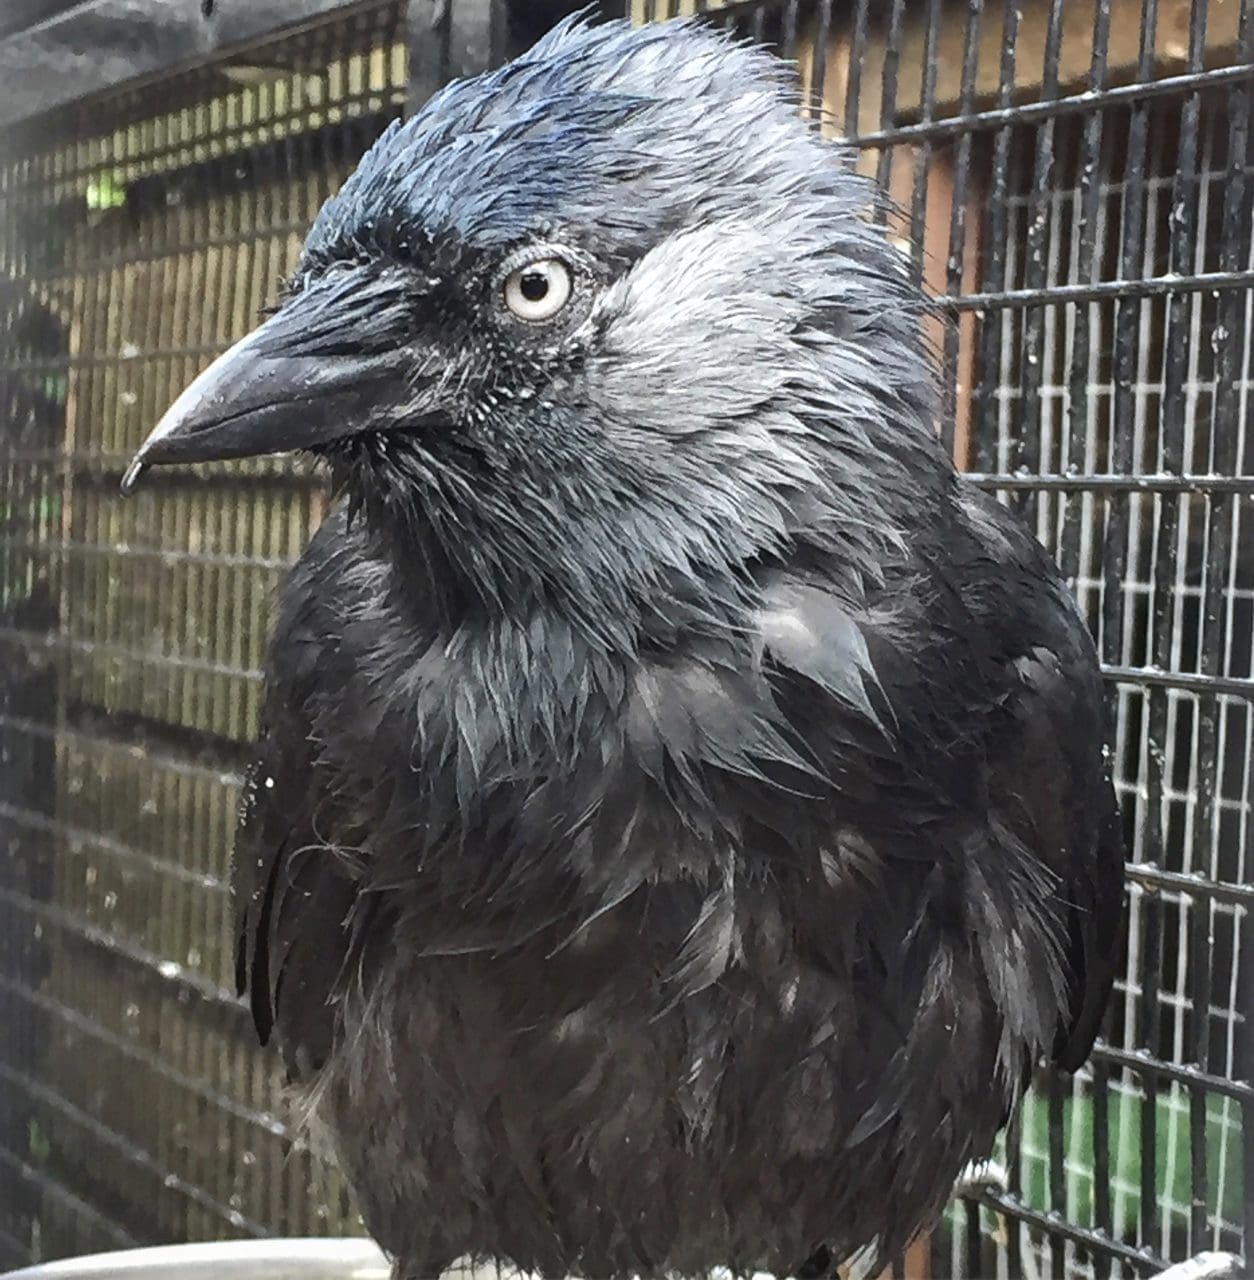 Jack is a juvenile male jackdaw, who has been raised and unintentionally imprinted. He also suffers of a cross beak, which has not being corrected in time when he was younger.